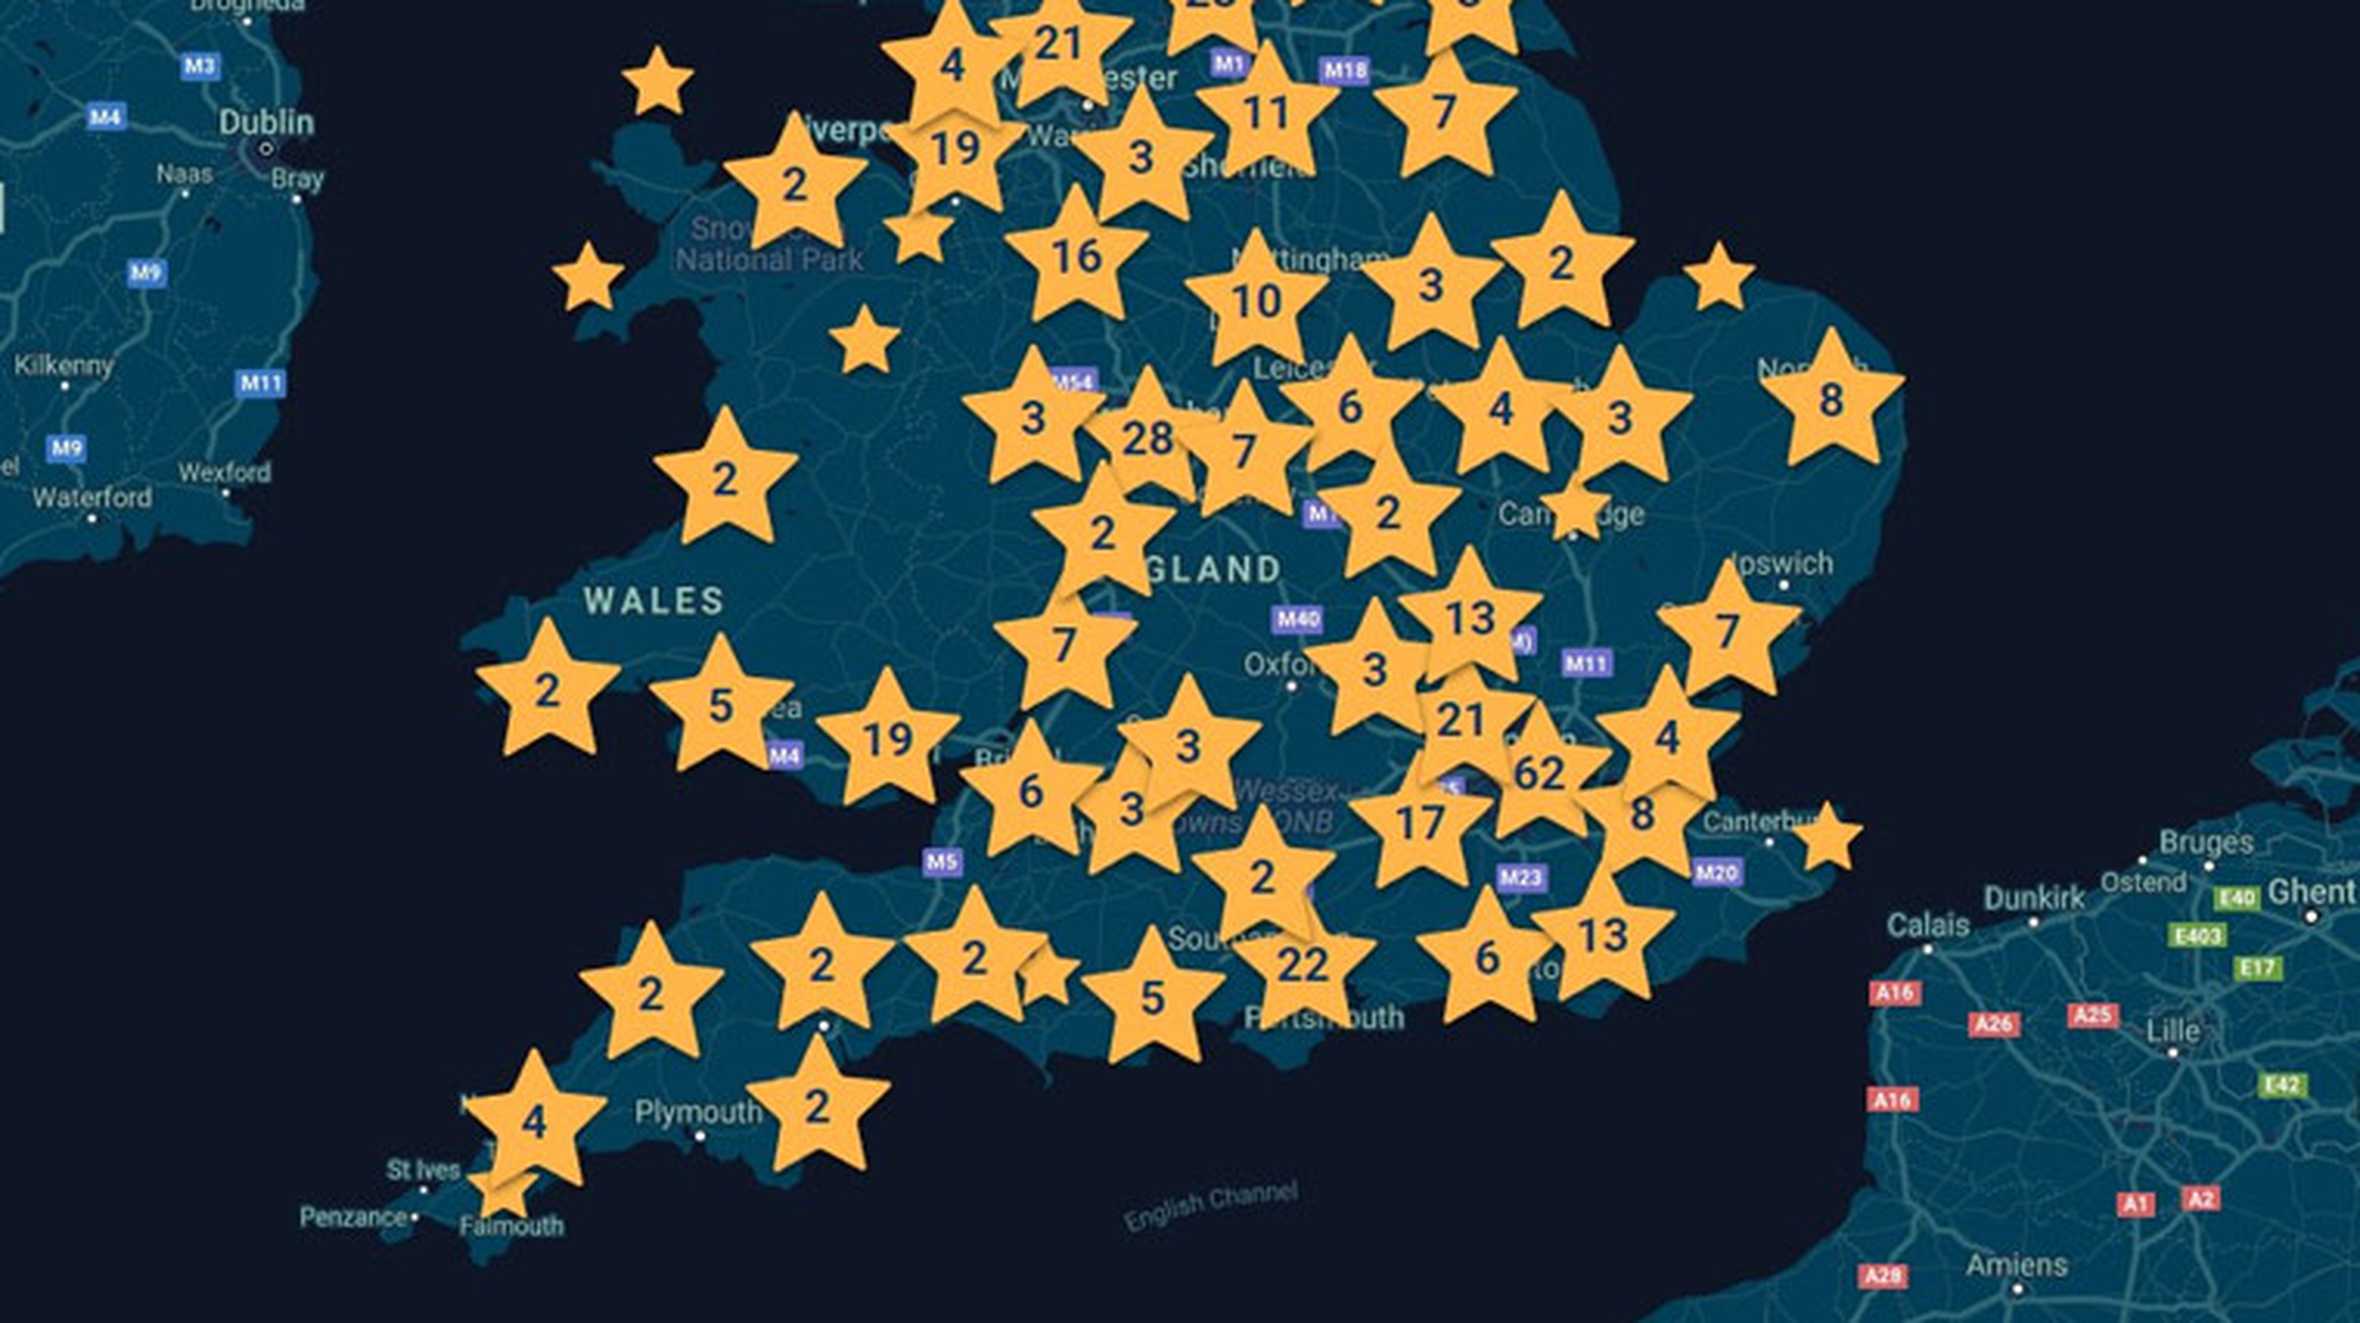 A zoomed in view of the wish map, centred on the south of England.